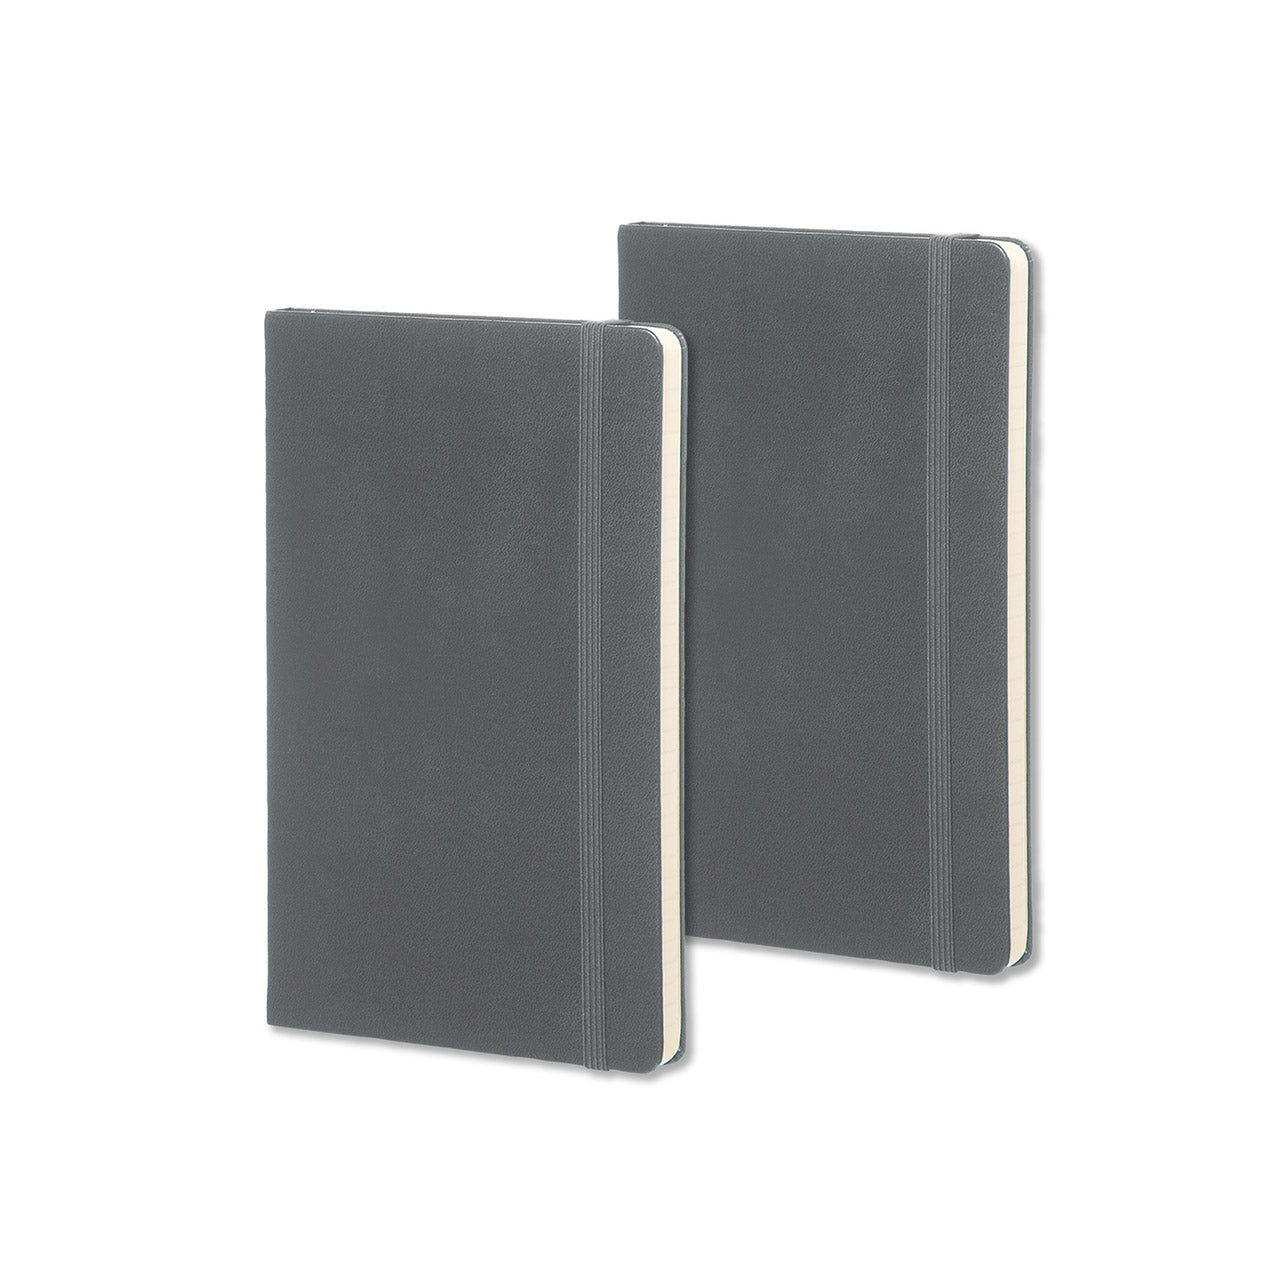 Classic Medium Hard Cover Notebook 2 for 1 Value Pack Slate Grey